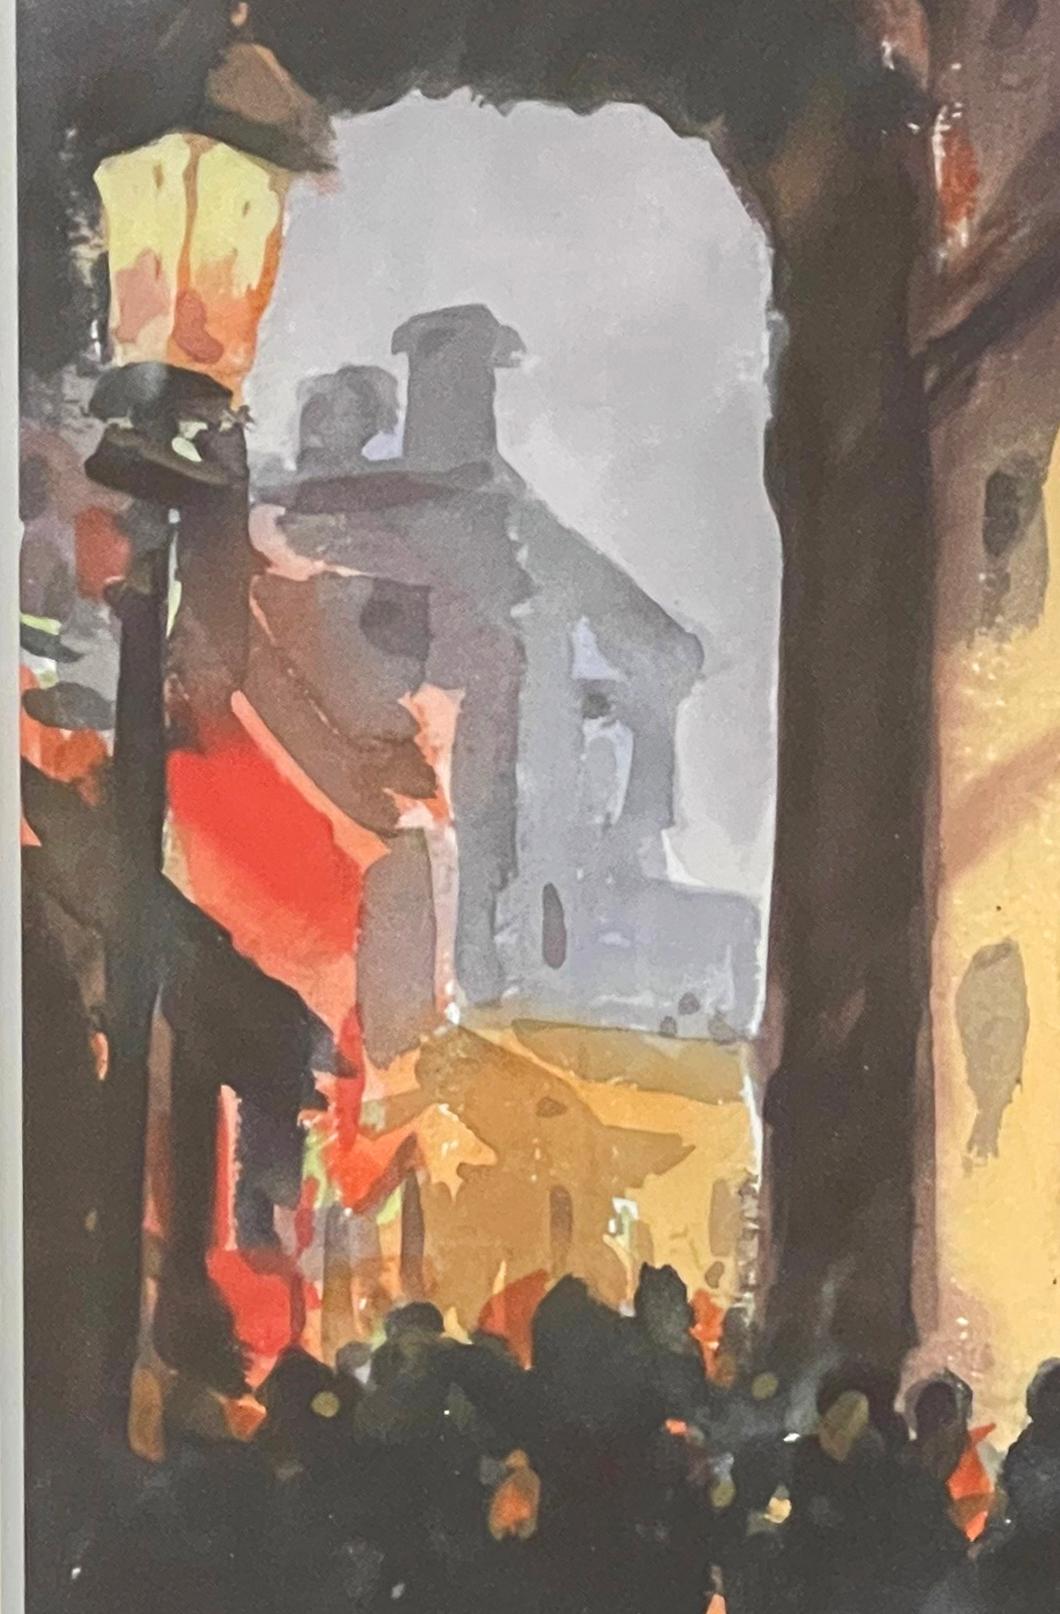 Atmospheric and full of depth, this view of an old European archway, with high-chimneyed houses beyond and crowds of people below, was painted in the 1930s by J. Alvin Storck, a Chicago artist best known for his mid century paintings. The artist